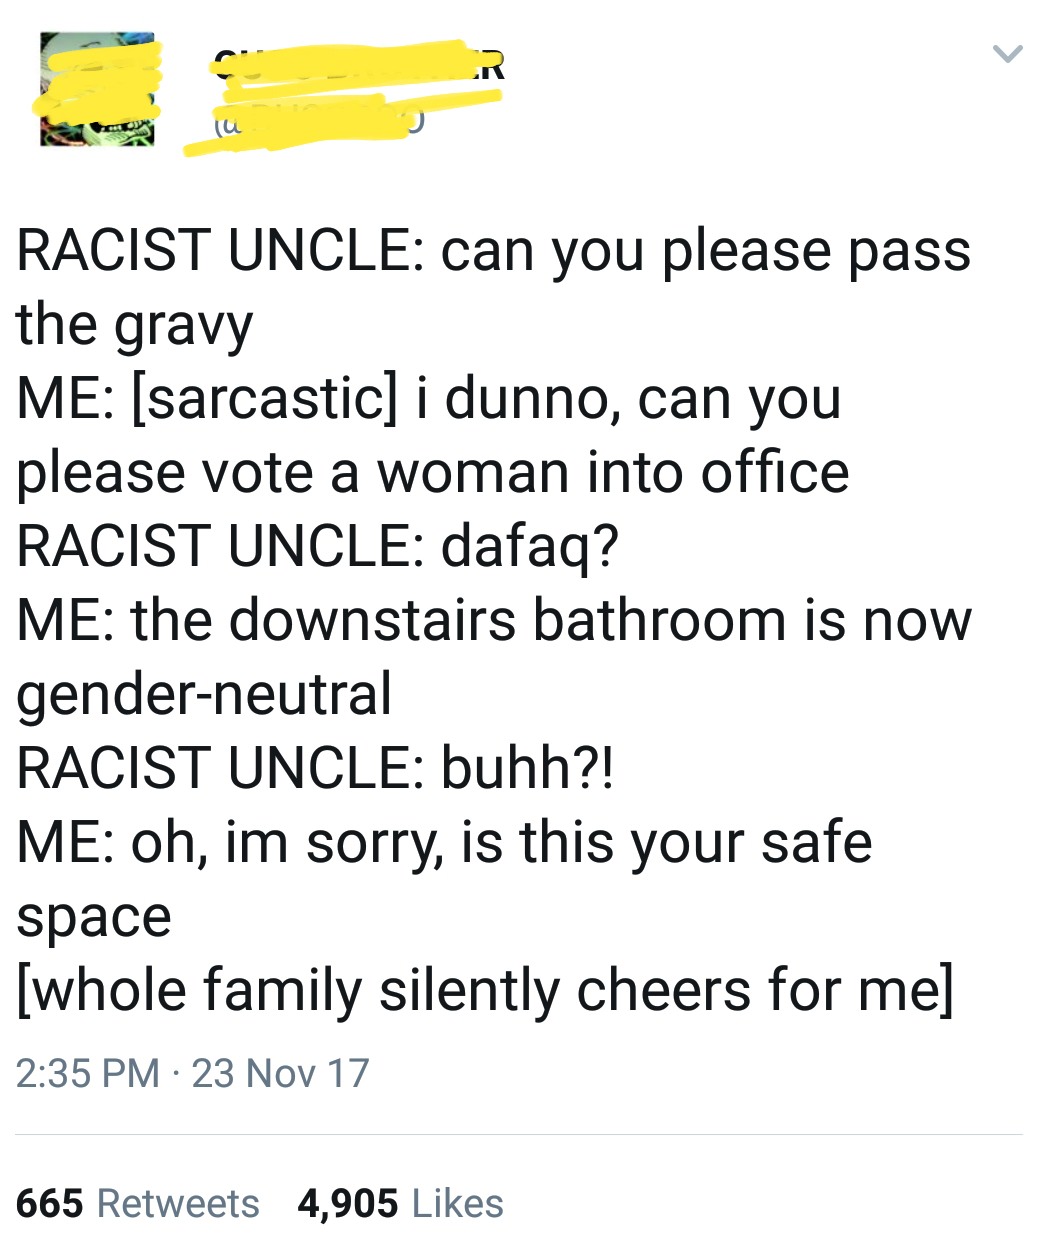 angle - Racist Uncle can you please pass the gravy Me sarcastic i dunno, can you please vote a woman into office Racist Uncle dafaq? Me the downstairs bathroom is now genderneutral Racist Uncle buhh?! Me oh, im sorry, is this your safe space whole family 